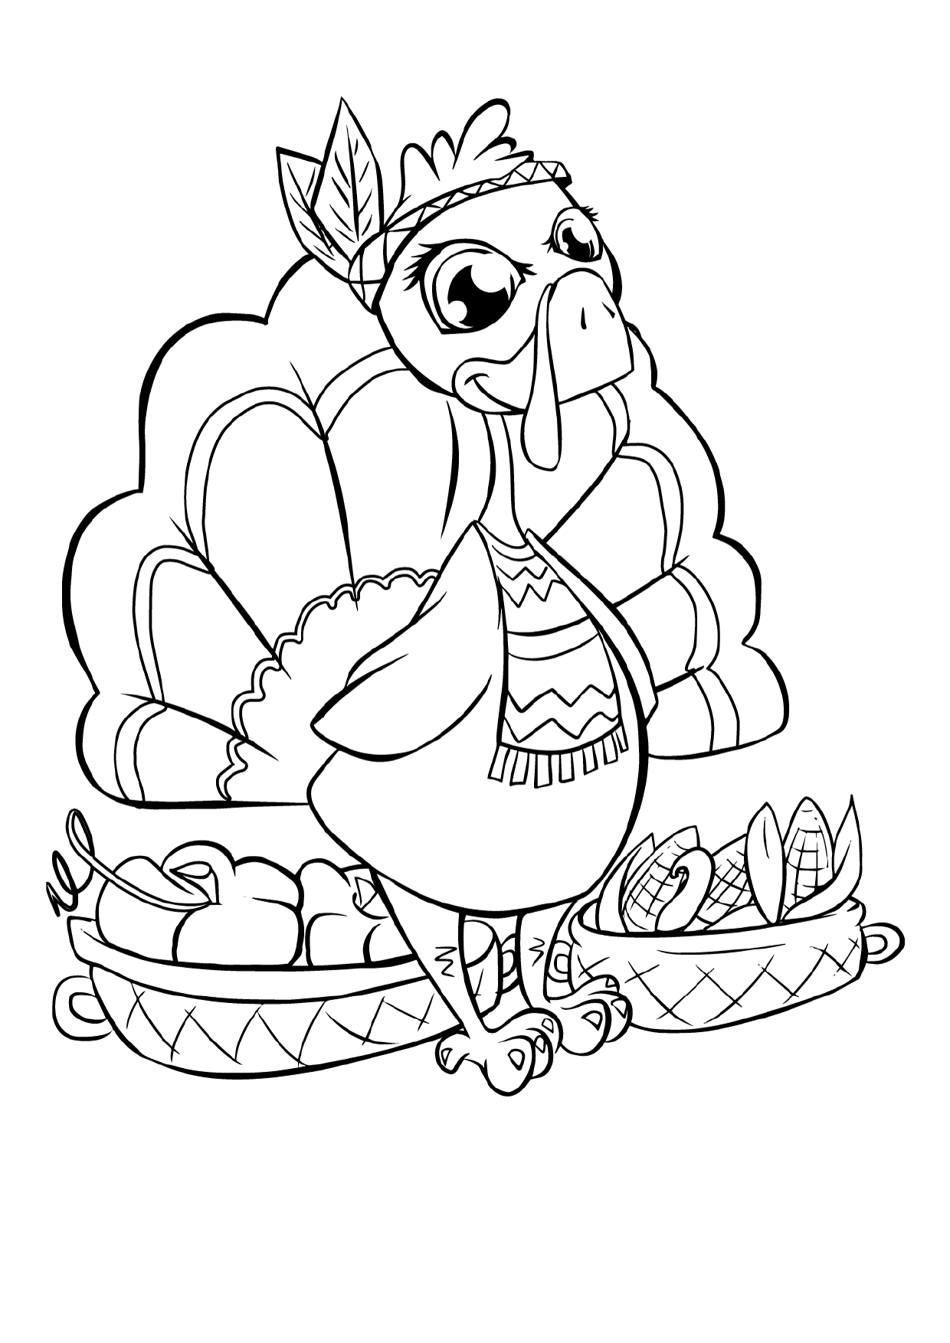 Thanksgiving Coloring Sheet with a Beautiful Turkey